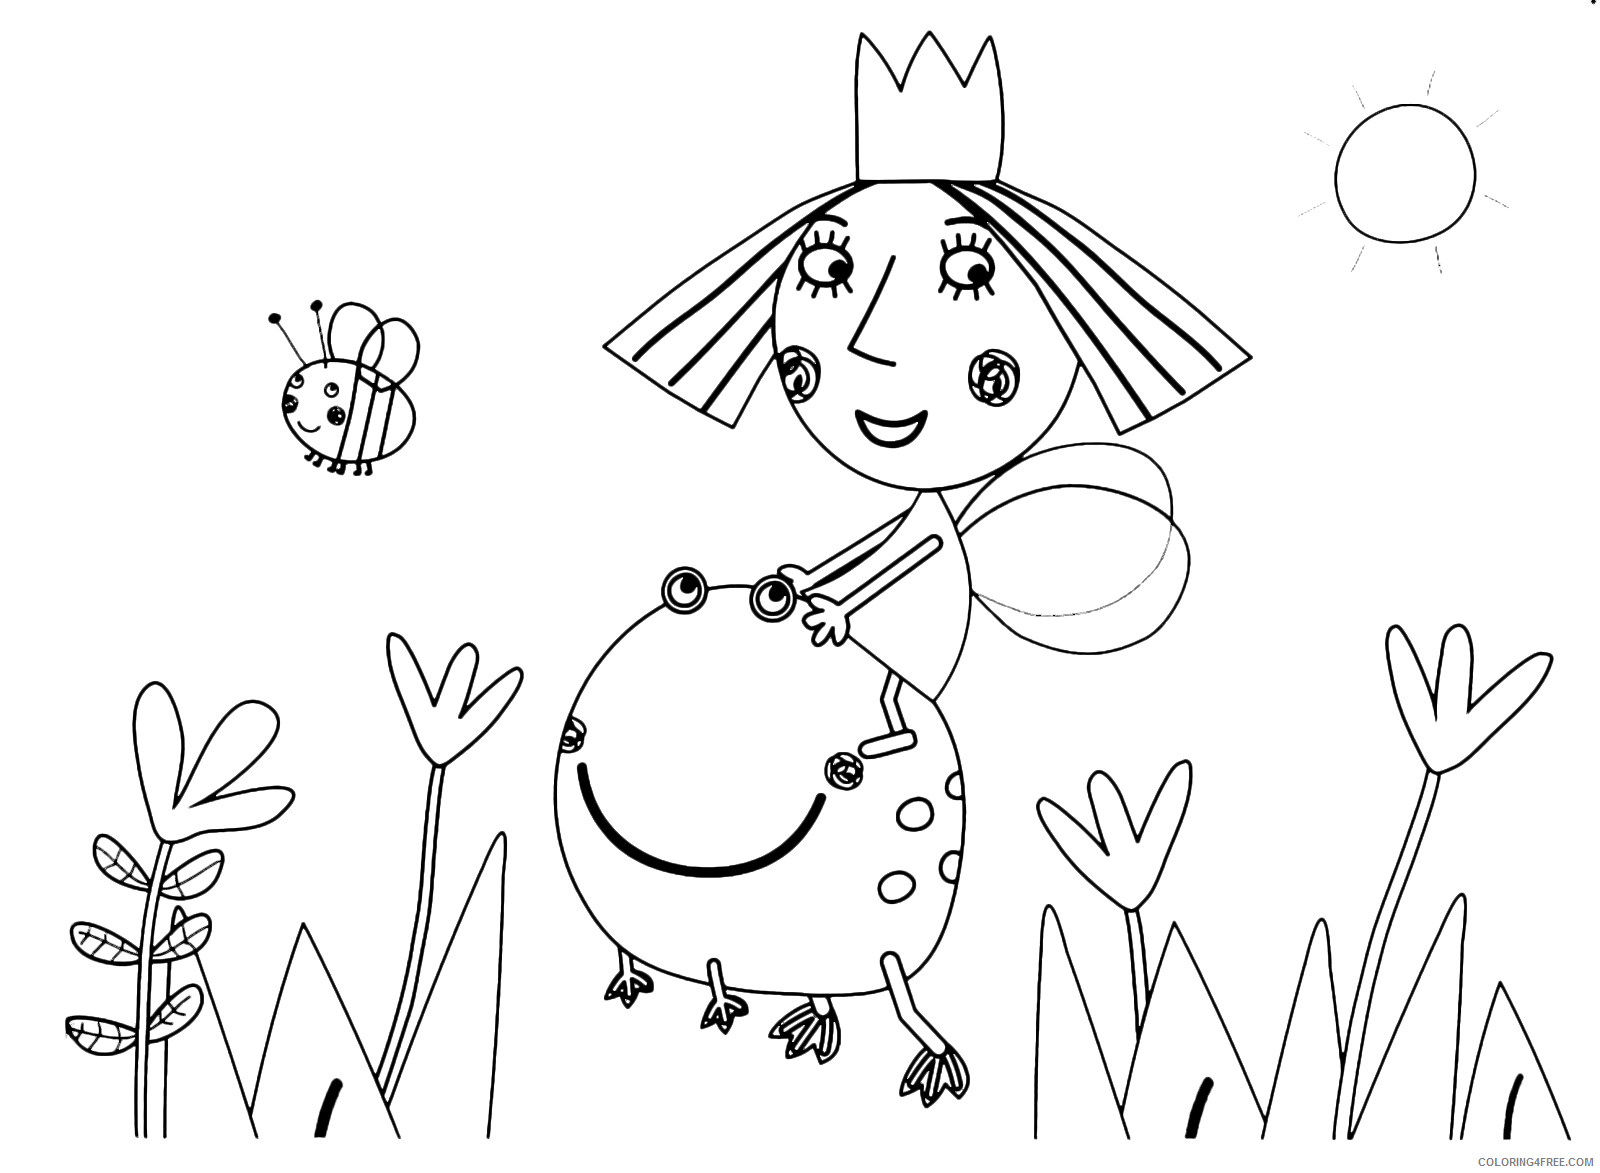 Frog Coloring Pages Animal Printable Sheets holly on frog 2021 2255 Coloring4free